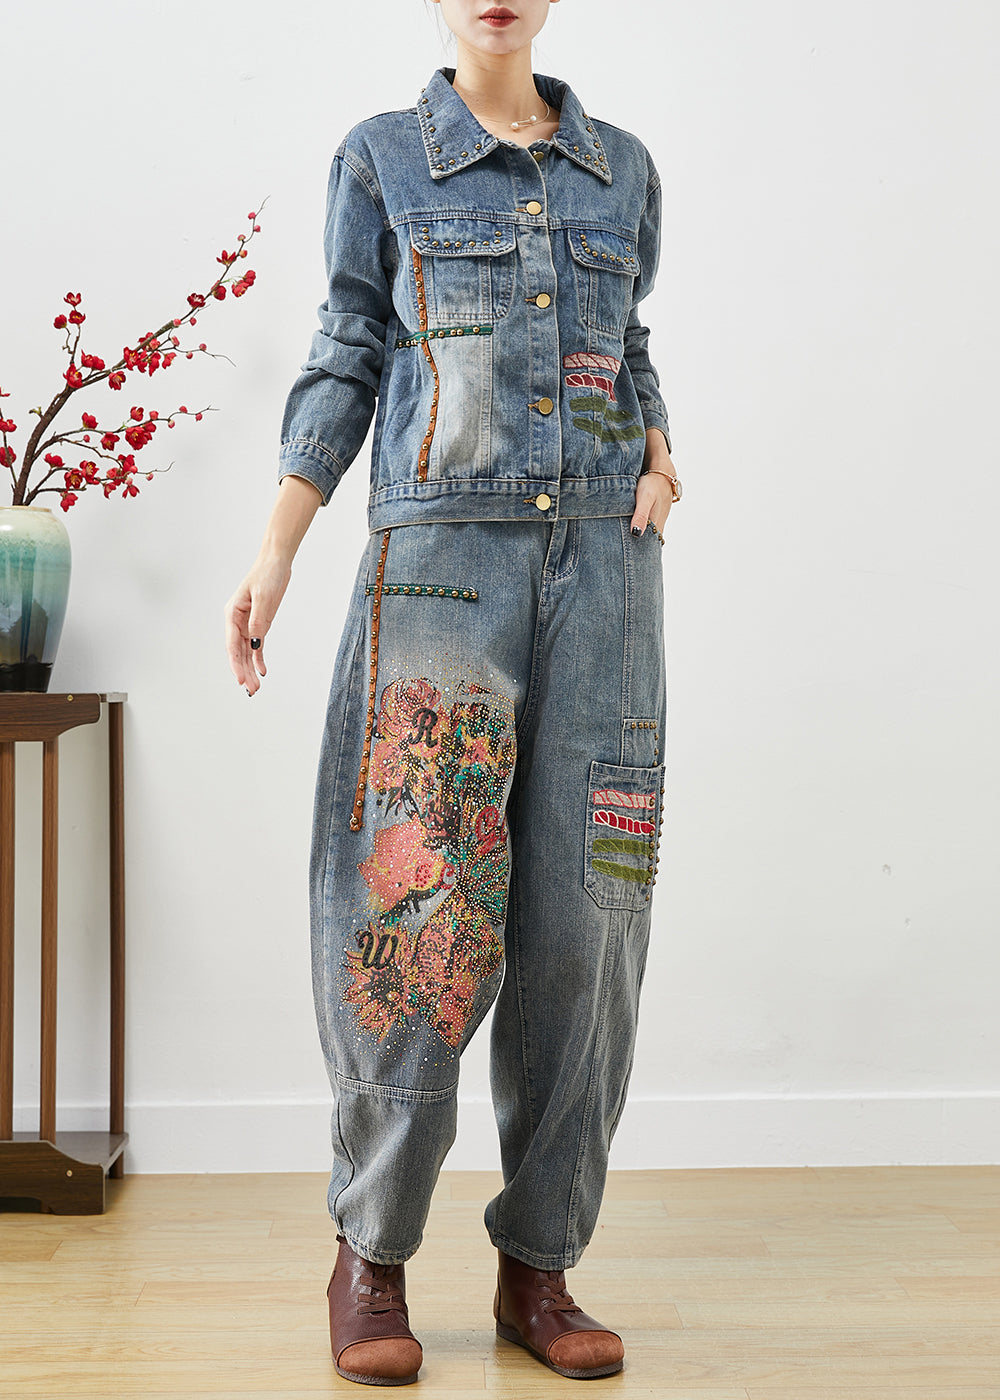 Art Blue Embroidered Print Rivet Denim Two Pieces Set Fall